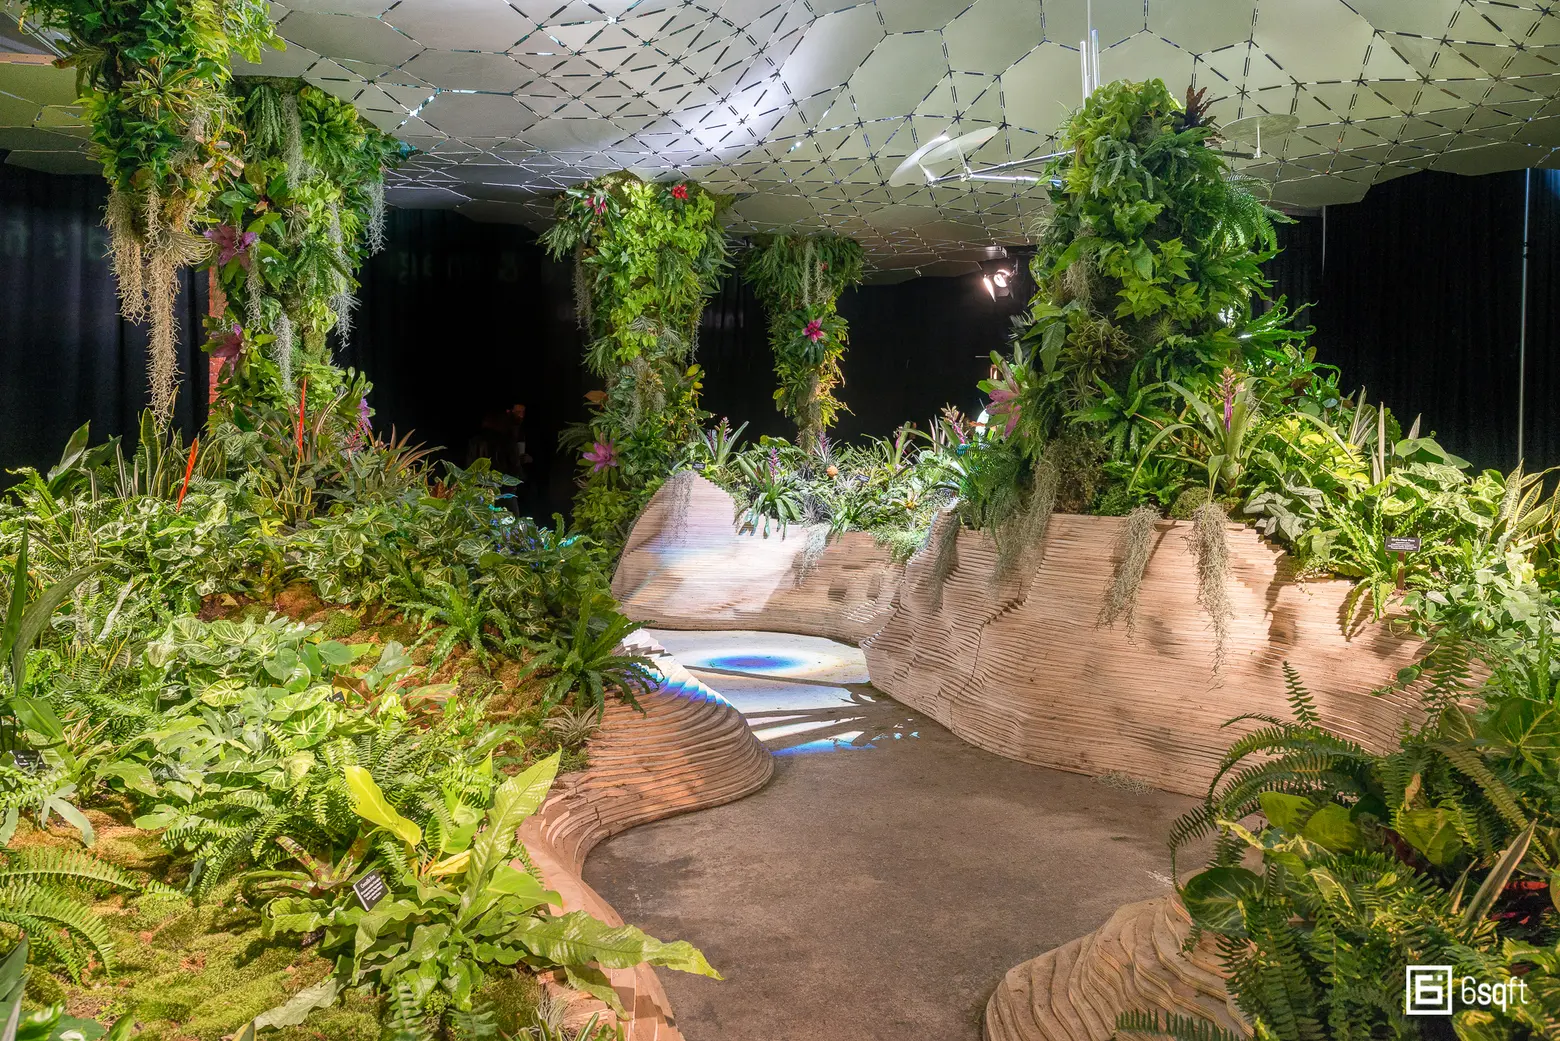 City Gives First Approval for the Lowline, Must Raise $10M Over the Next Year